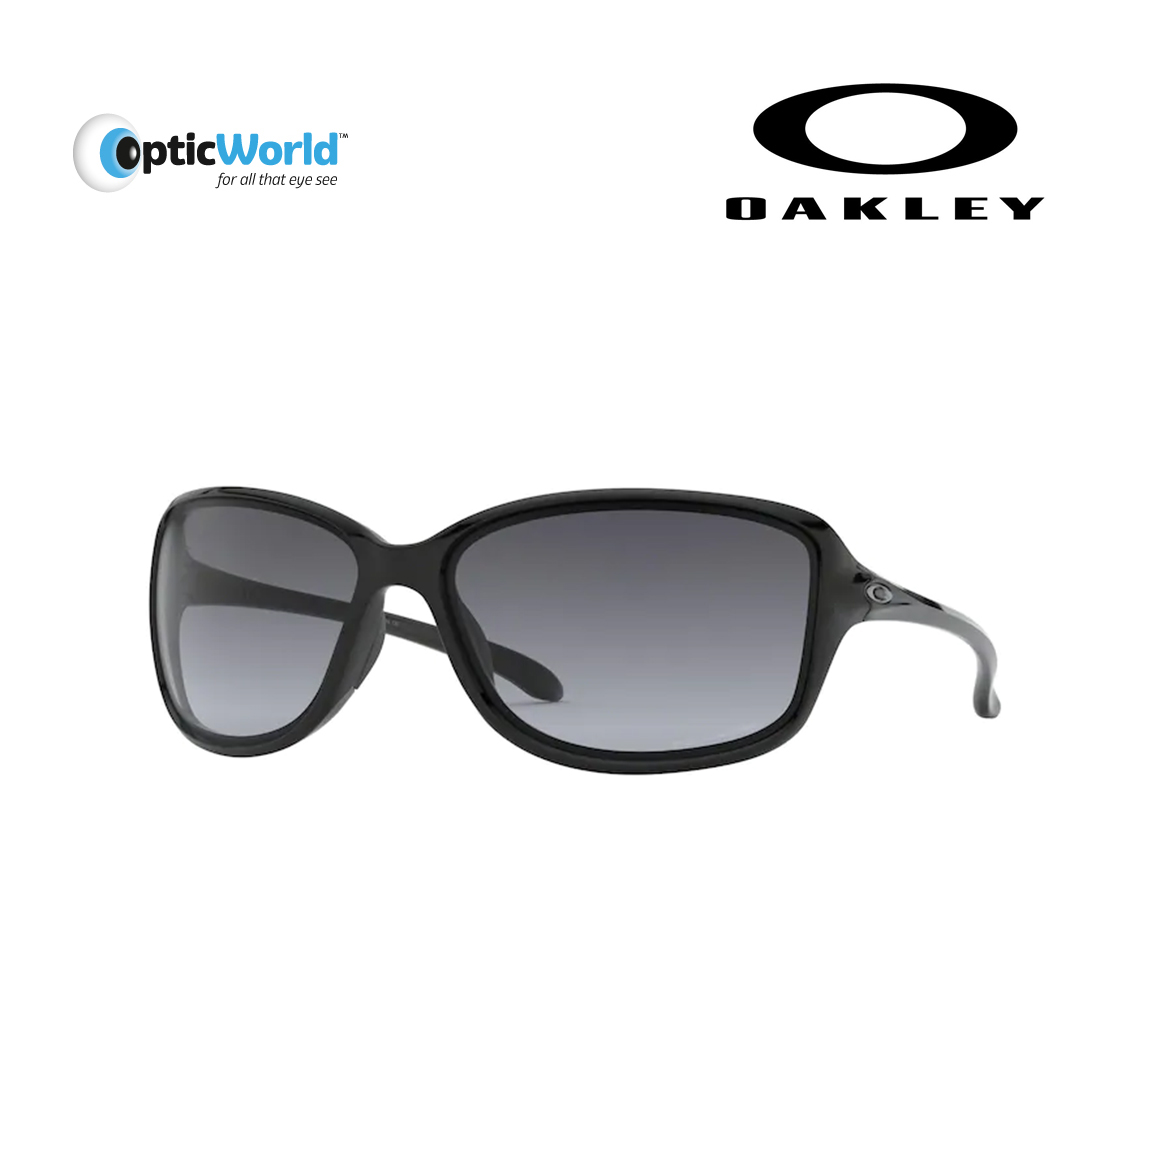 Oakley OO9301 COHORT - Designer Sunglasses with Case (All Colours) | eBay